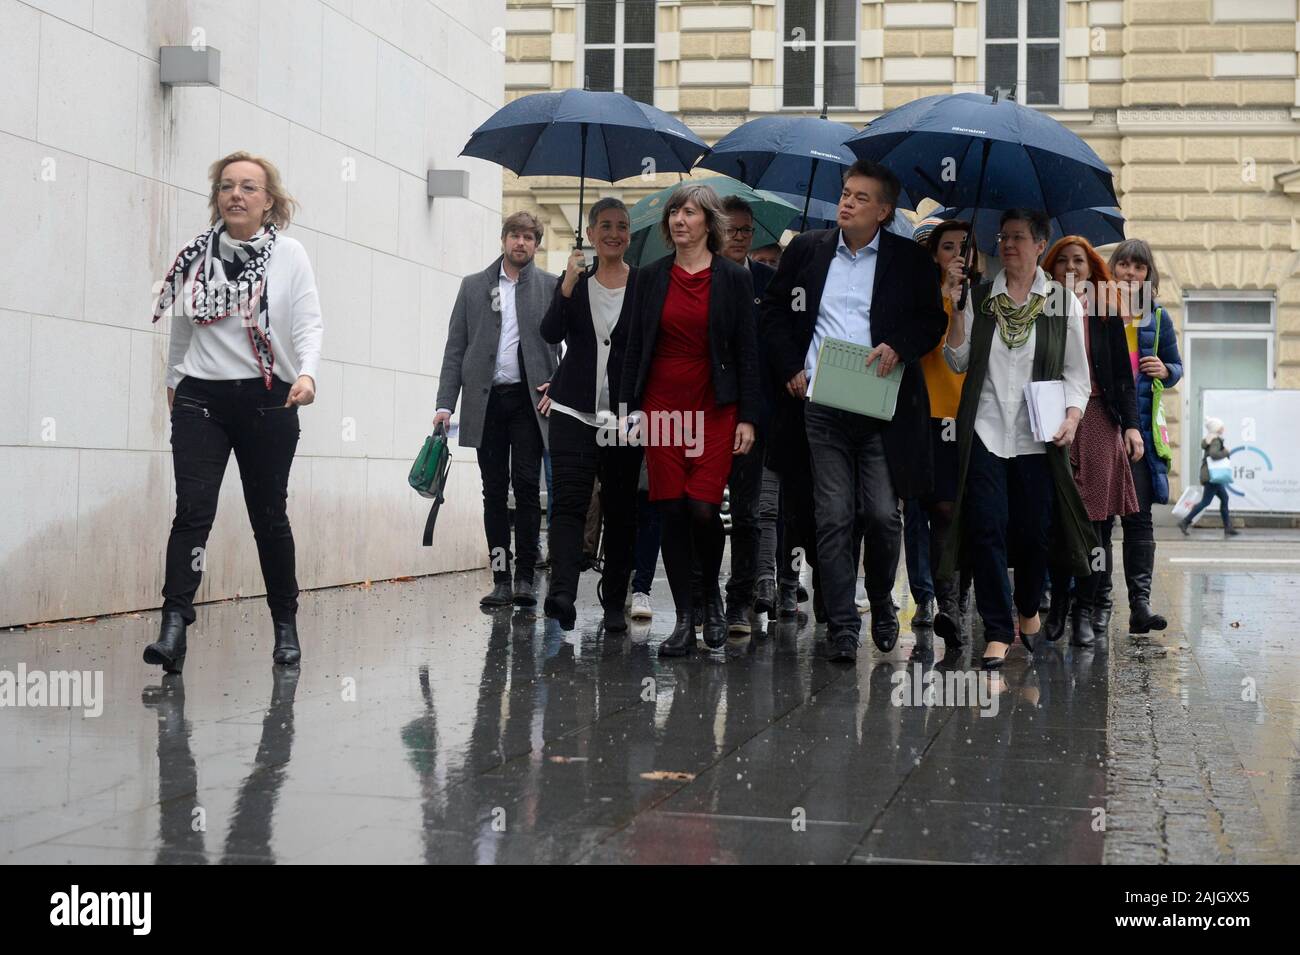 Salzburg, Salzburg, Austria. 04th January 2020. 42nd Federal Congress of the Greens 'Courageous into the future' at the Salzburg Congress on 4th January 2019. Decision on government participation and confirmation of the government agreement passed by the EBV (Extended federal board). Picture shows the Green Government team on the way to the Federal Congress.  Credit: Franz Perc / Alamy Live News Stock Photo